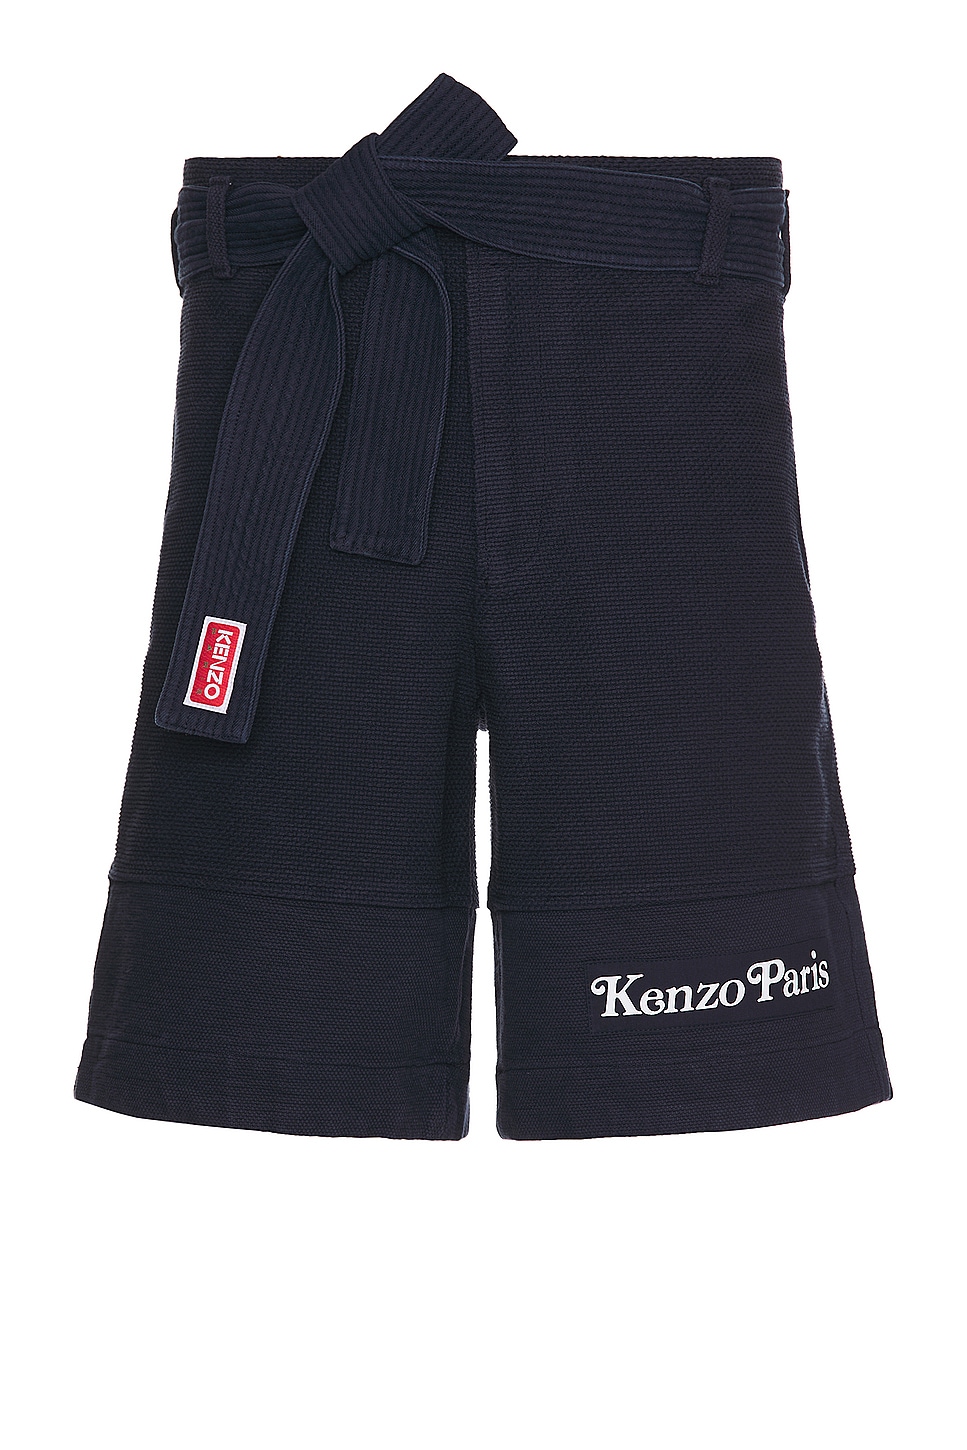 Image 1 of Kenzo By Verdy Judo Short in Midnight